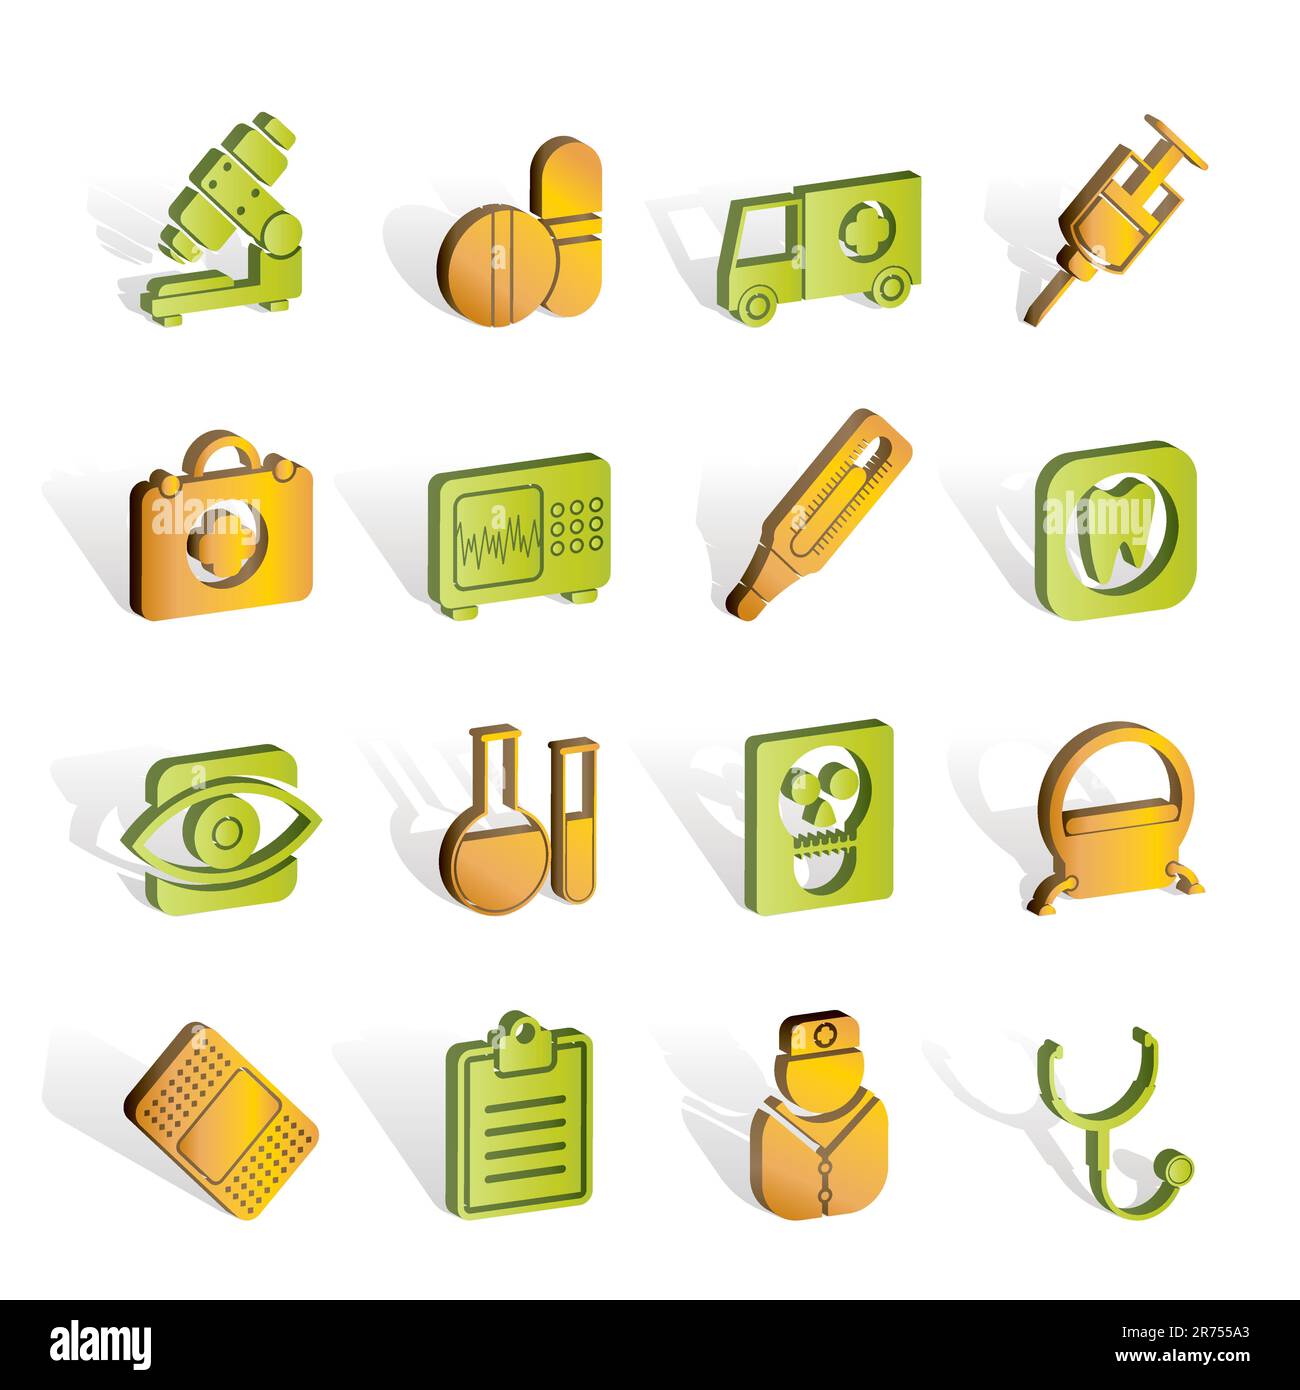 medical, hospital and health care icons - vector icon set Stock Vector